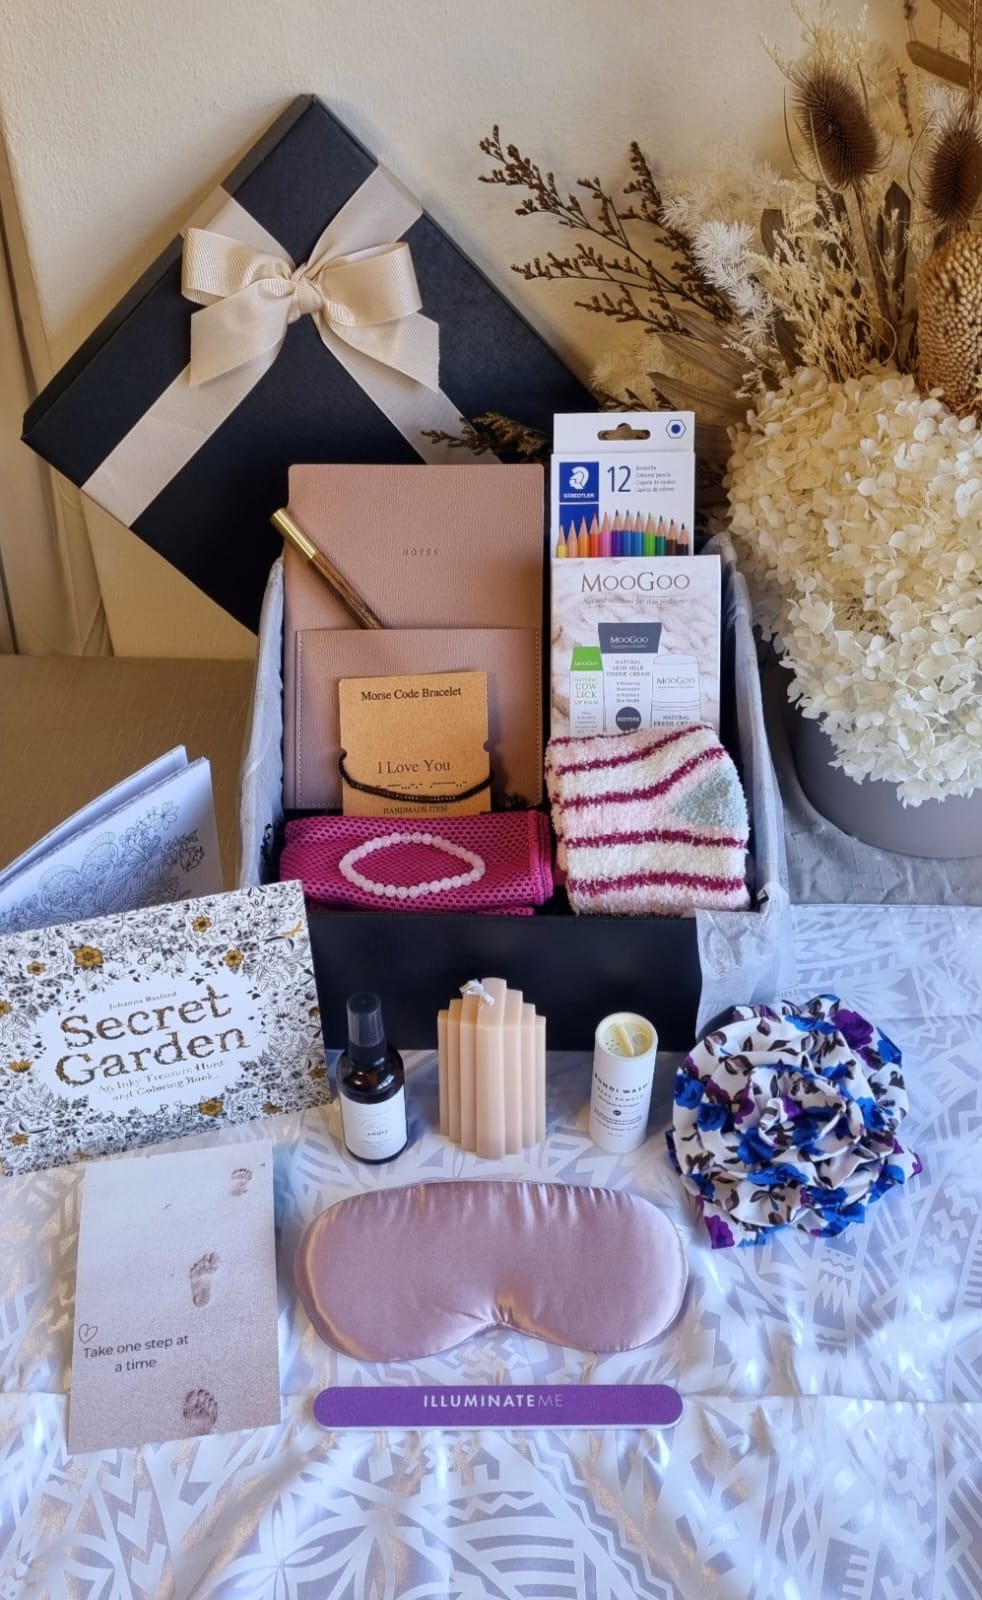 Care Package for Cancer Patients: What to Include